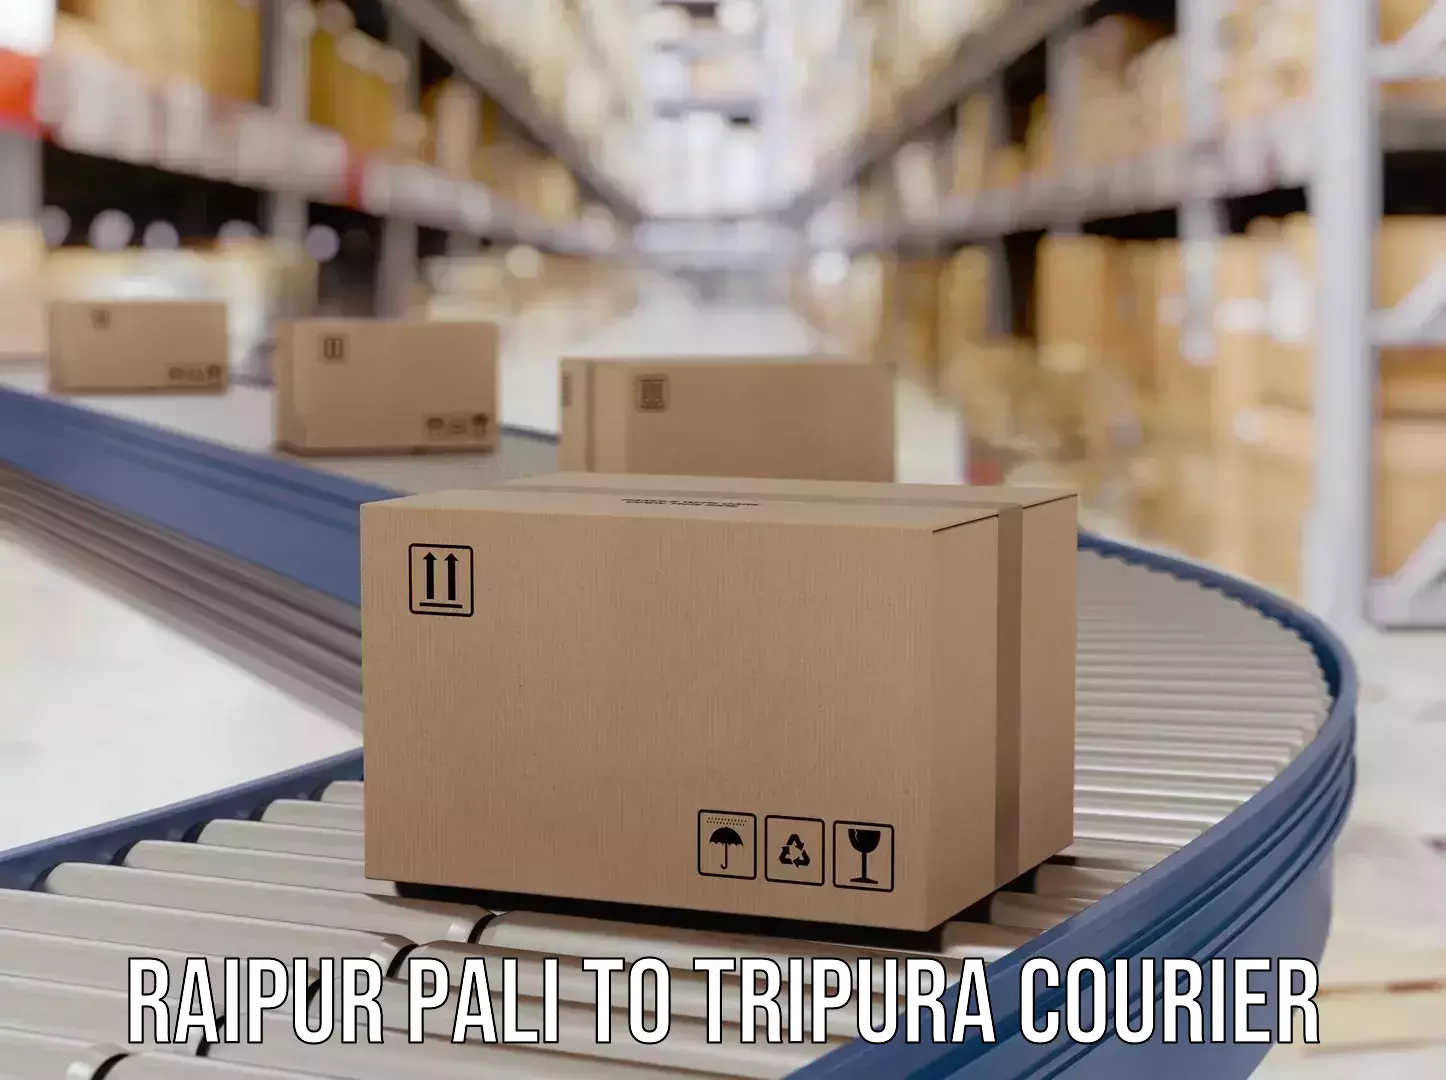 Nationwide delivery network Raipur Pali to Tripura